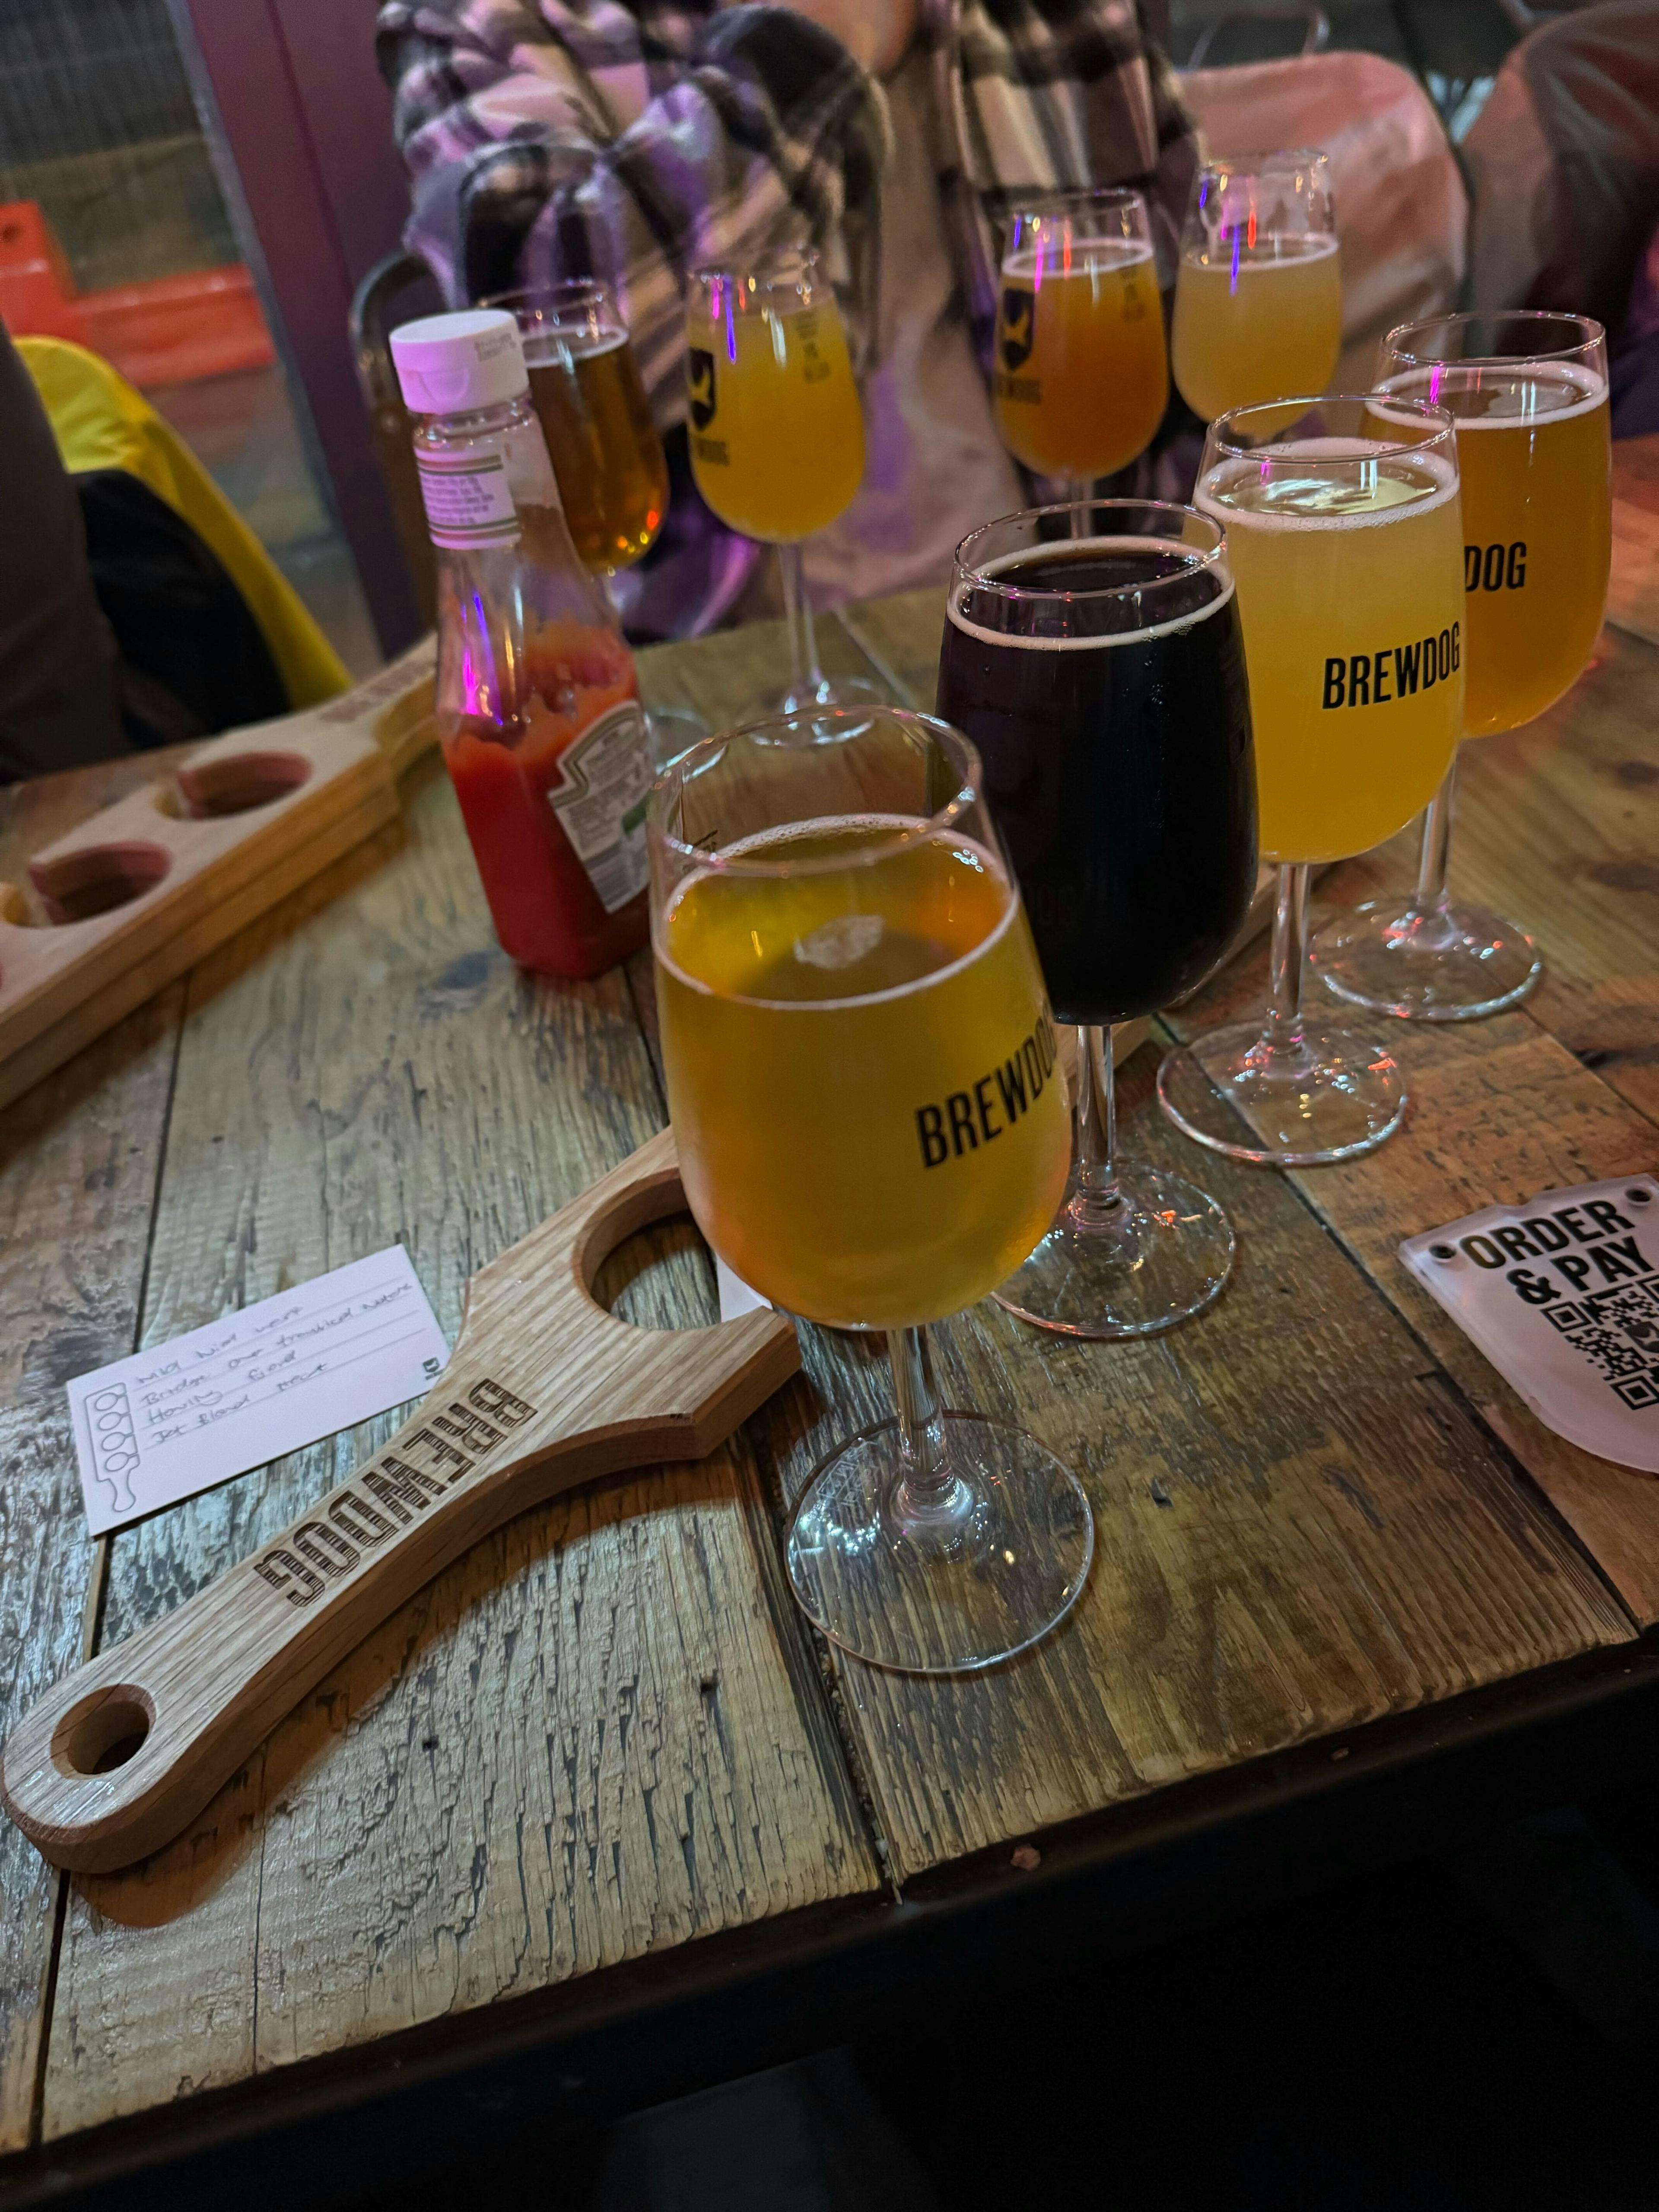 Our table at BrewDog CollabFest 2023, full of a variety of beer